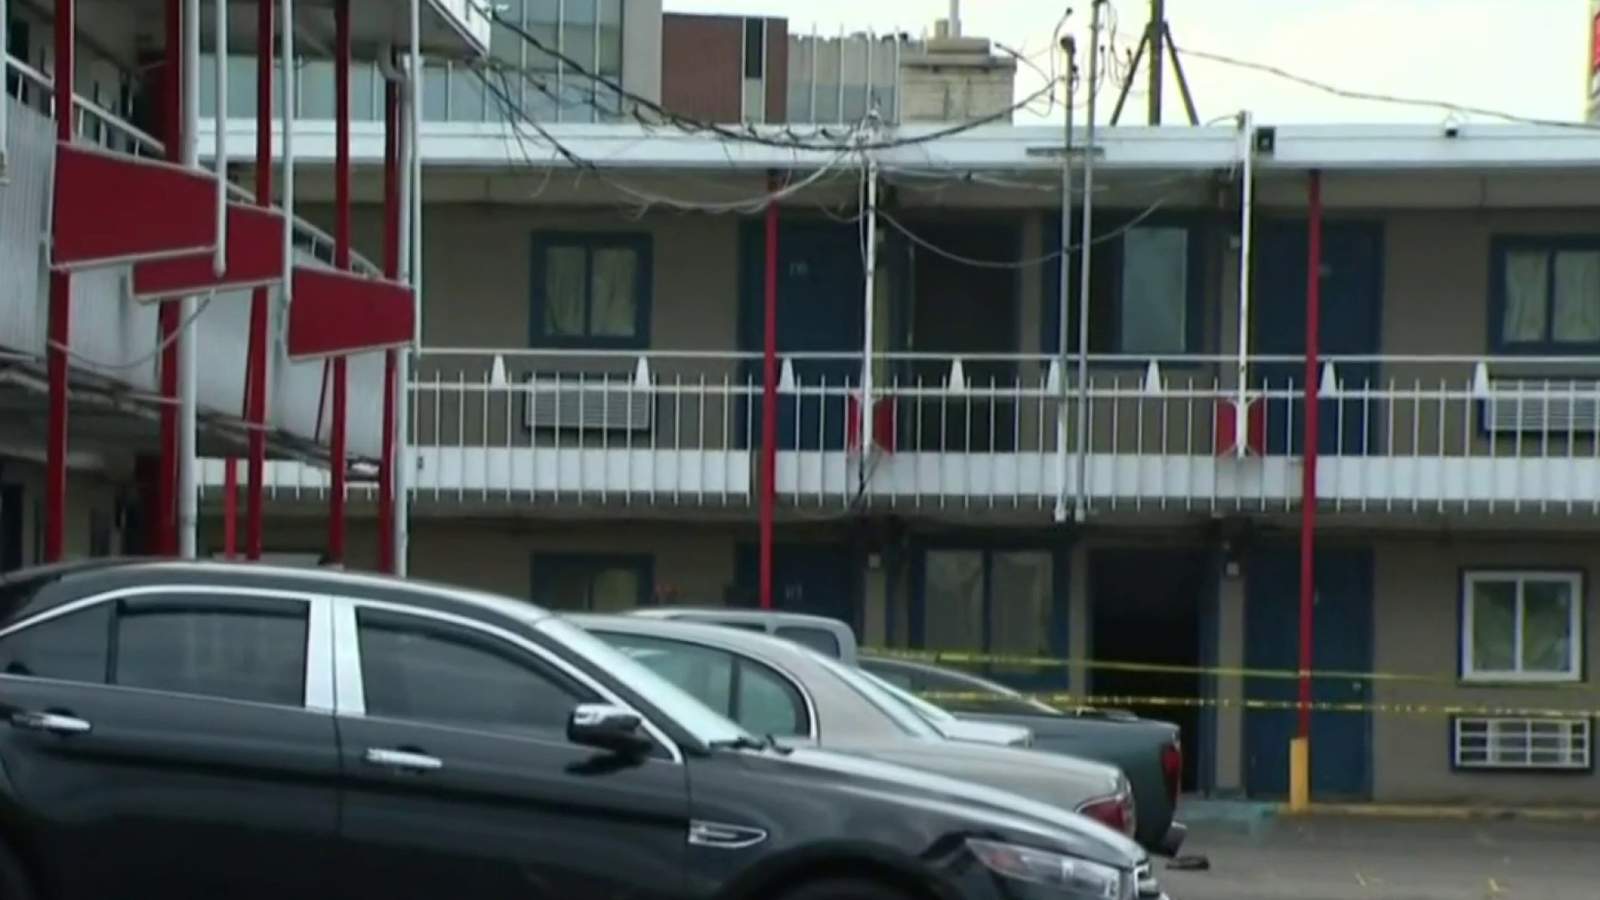 Homicide investigation underway at Cranbrook House Motel after man was fatally shot